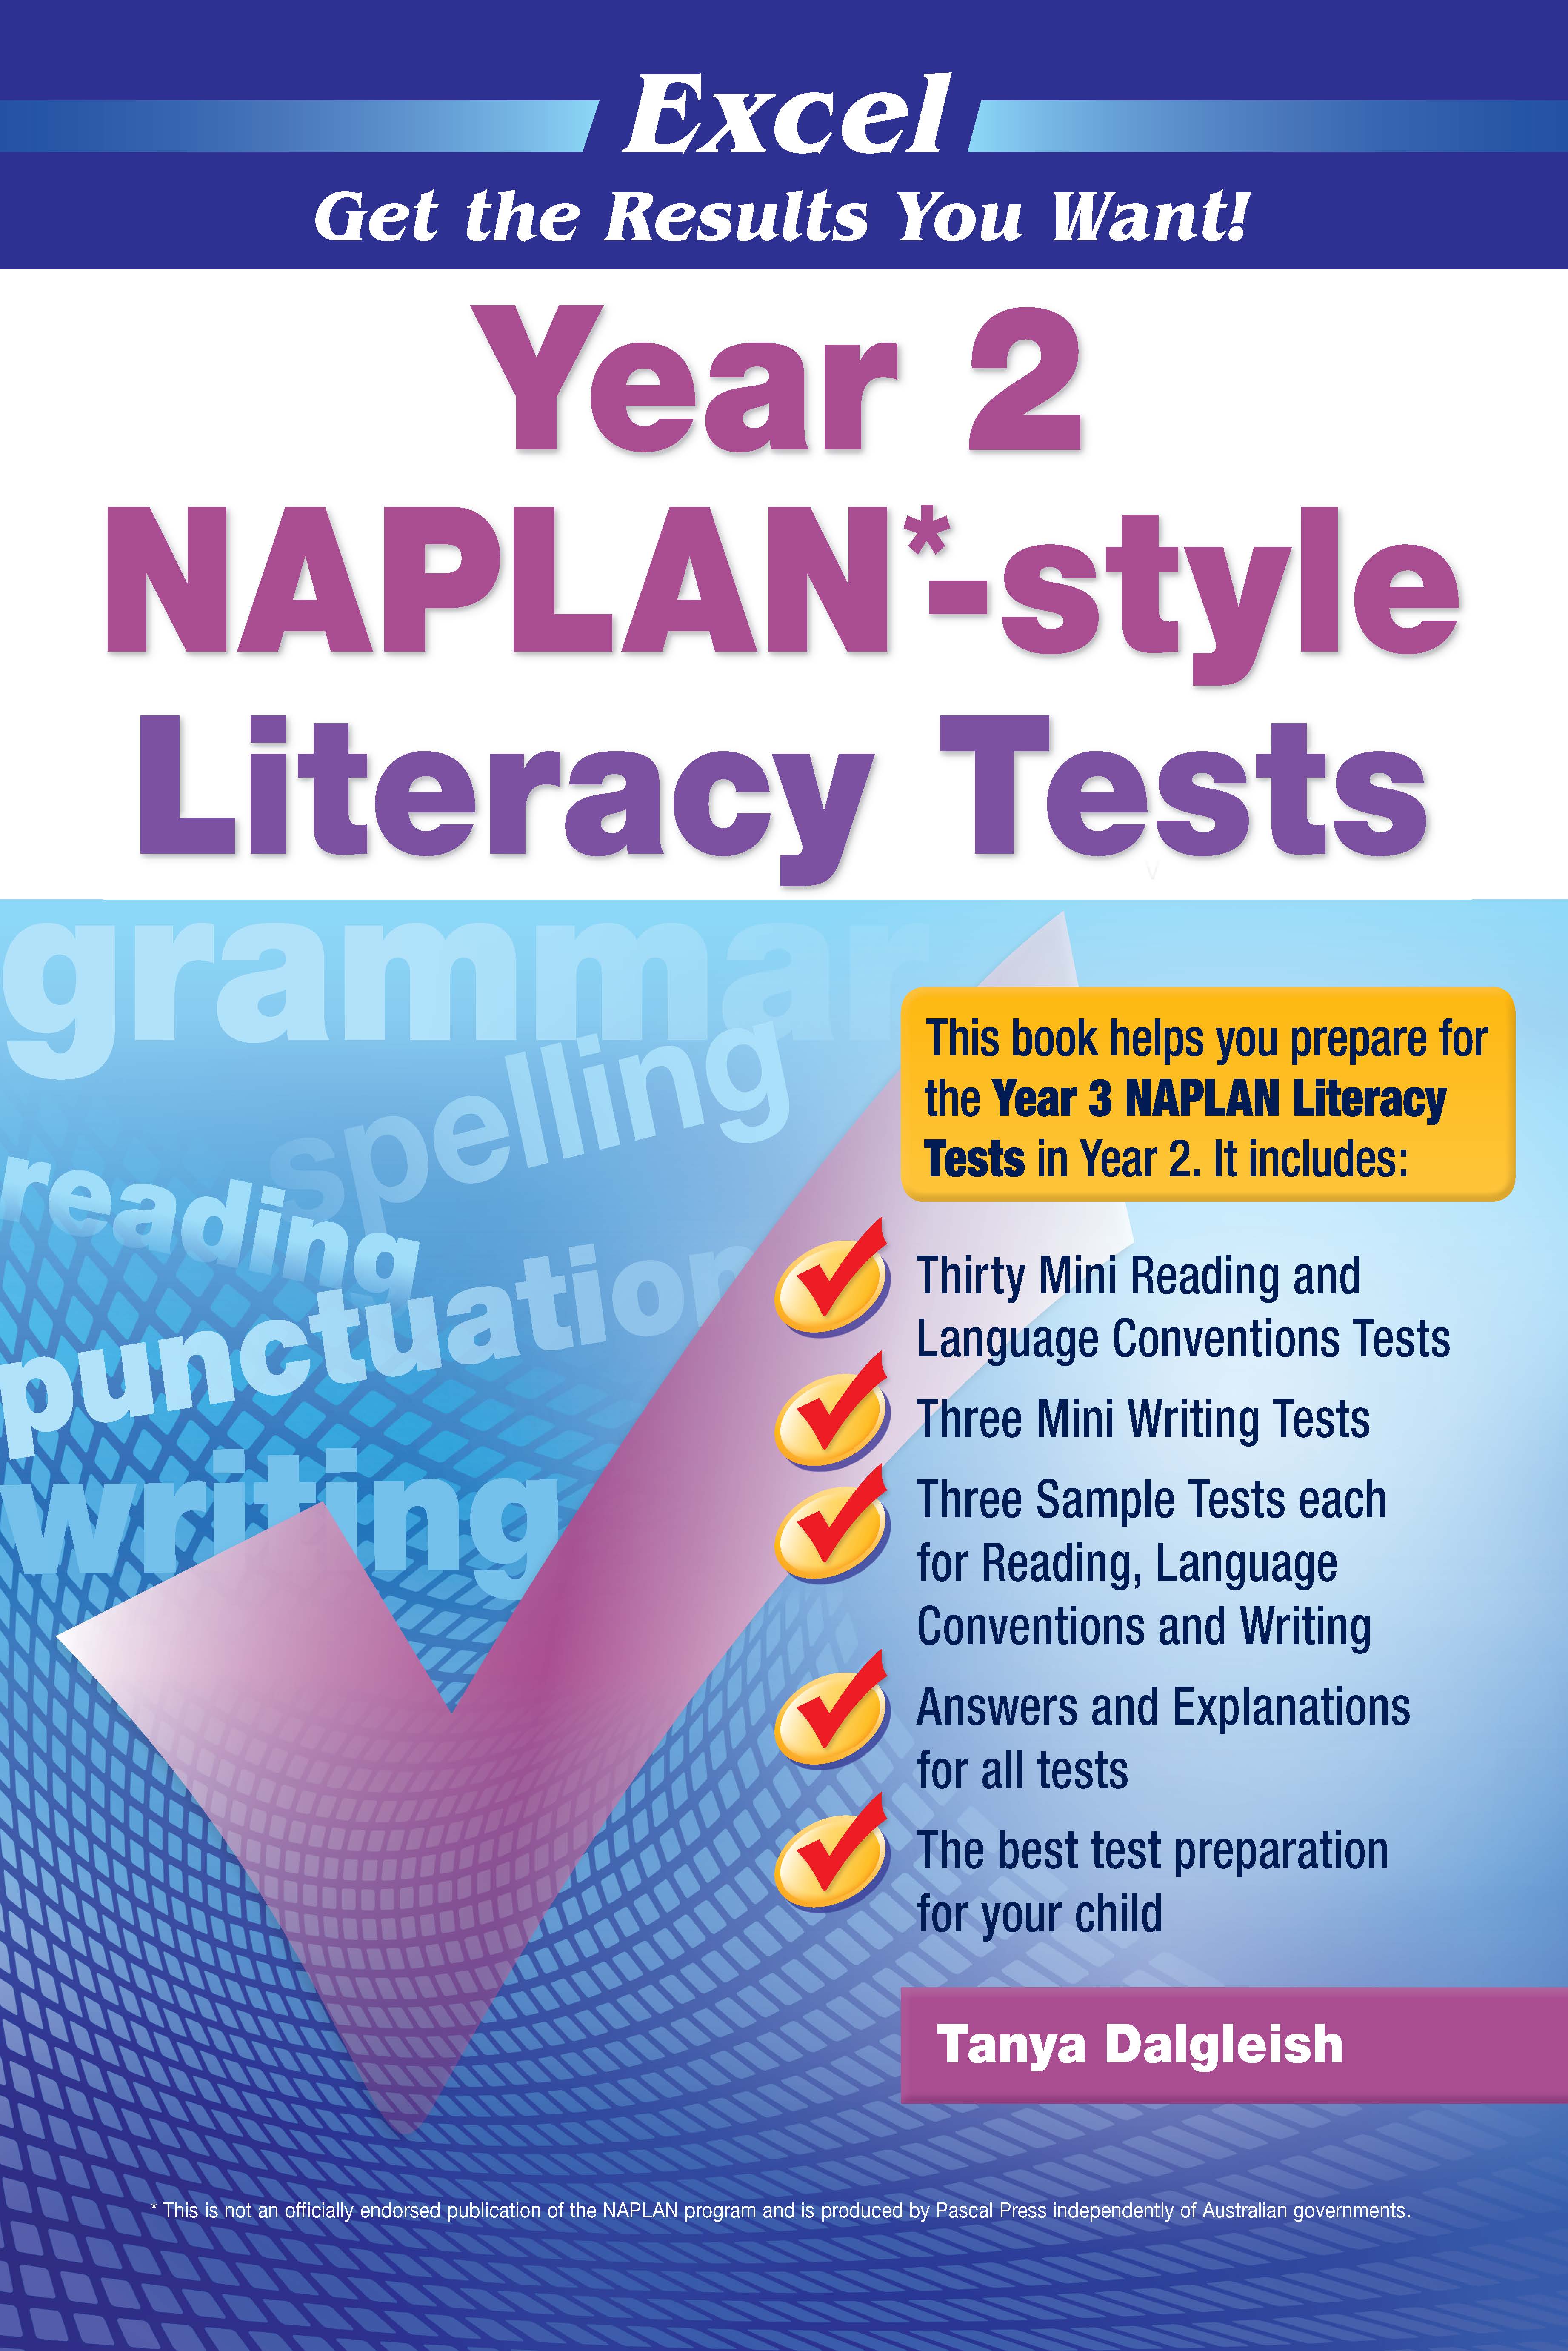 Picture of Excel NAPLAN*-style Literacy Tests Year 2